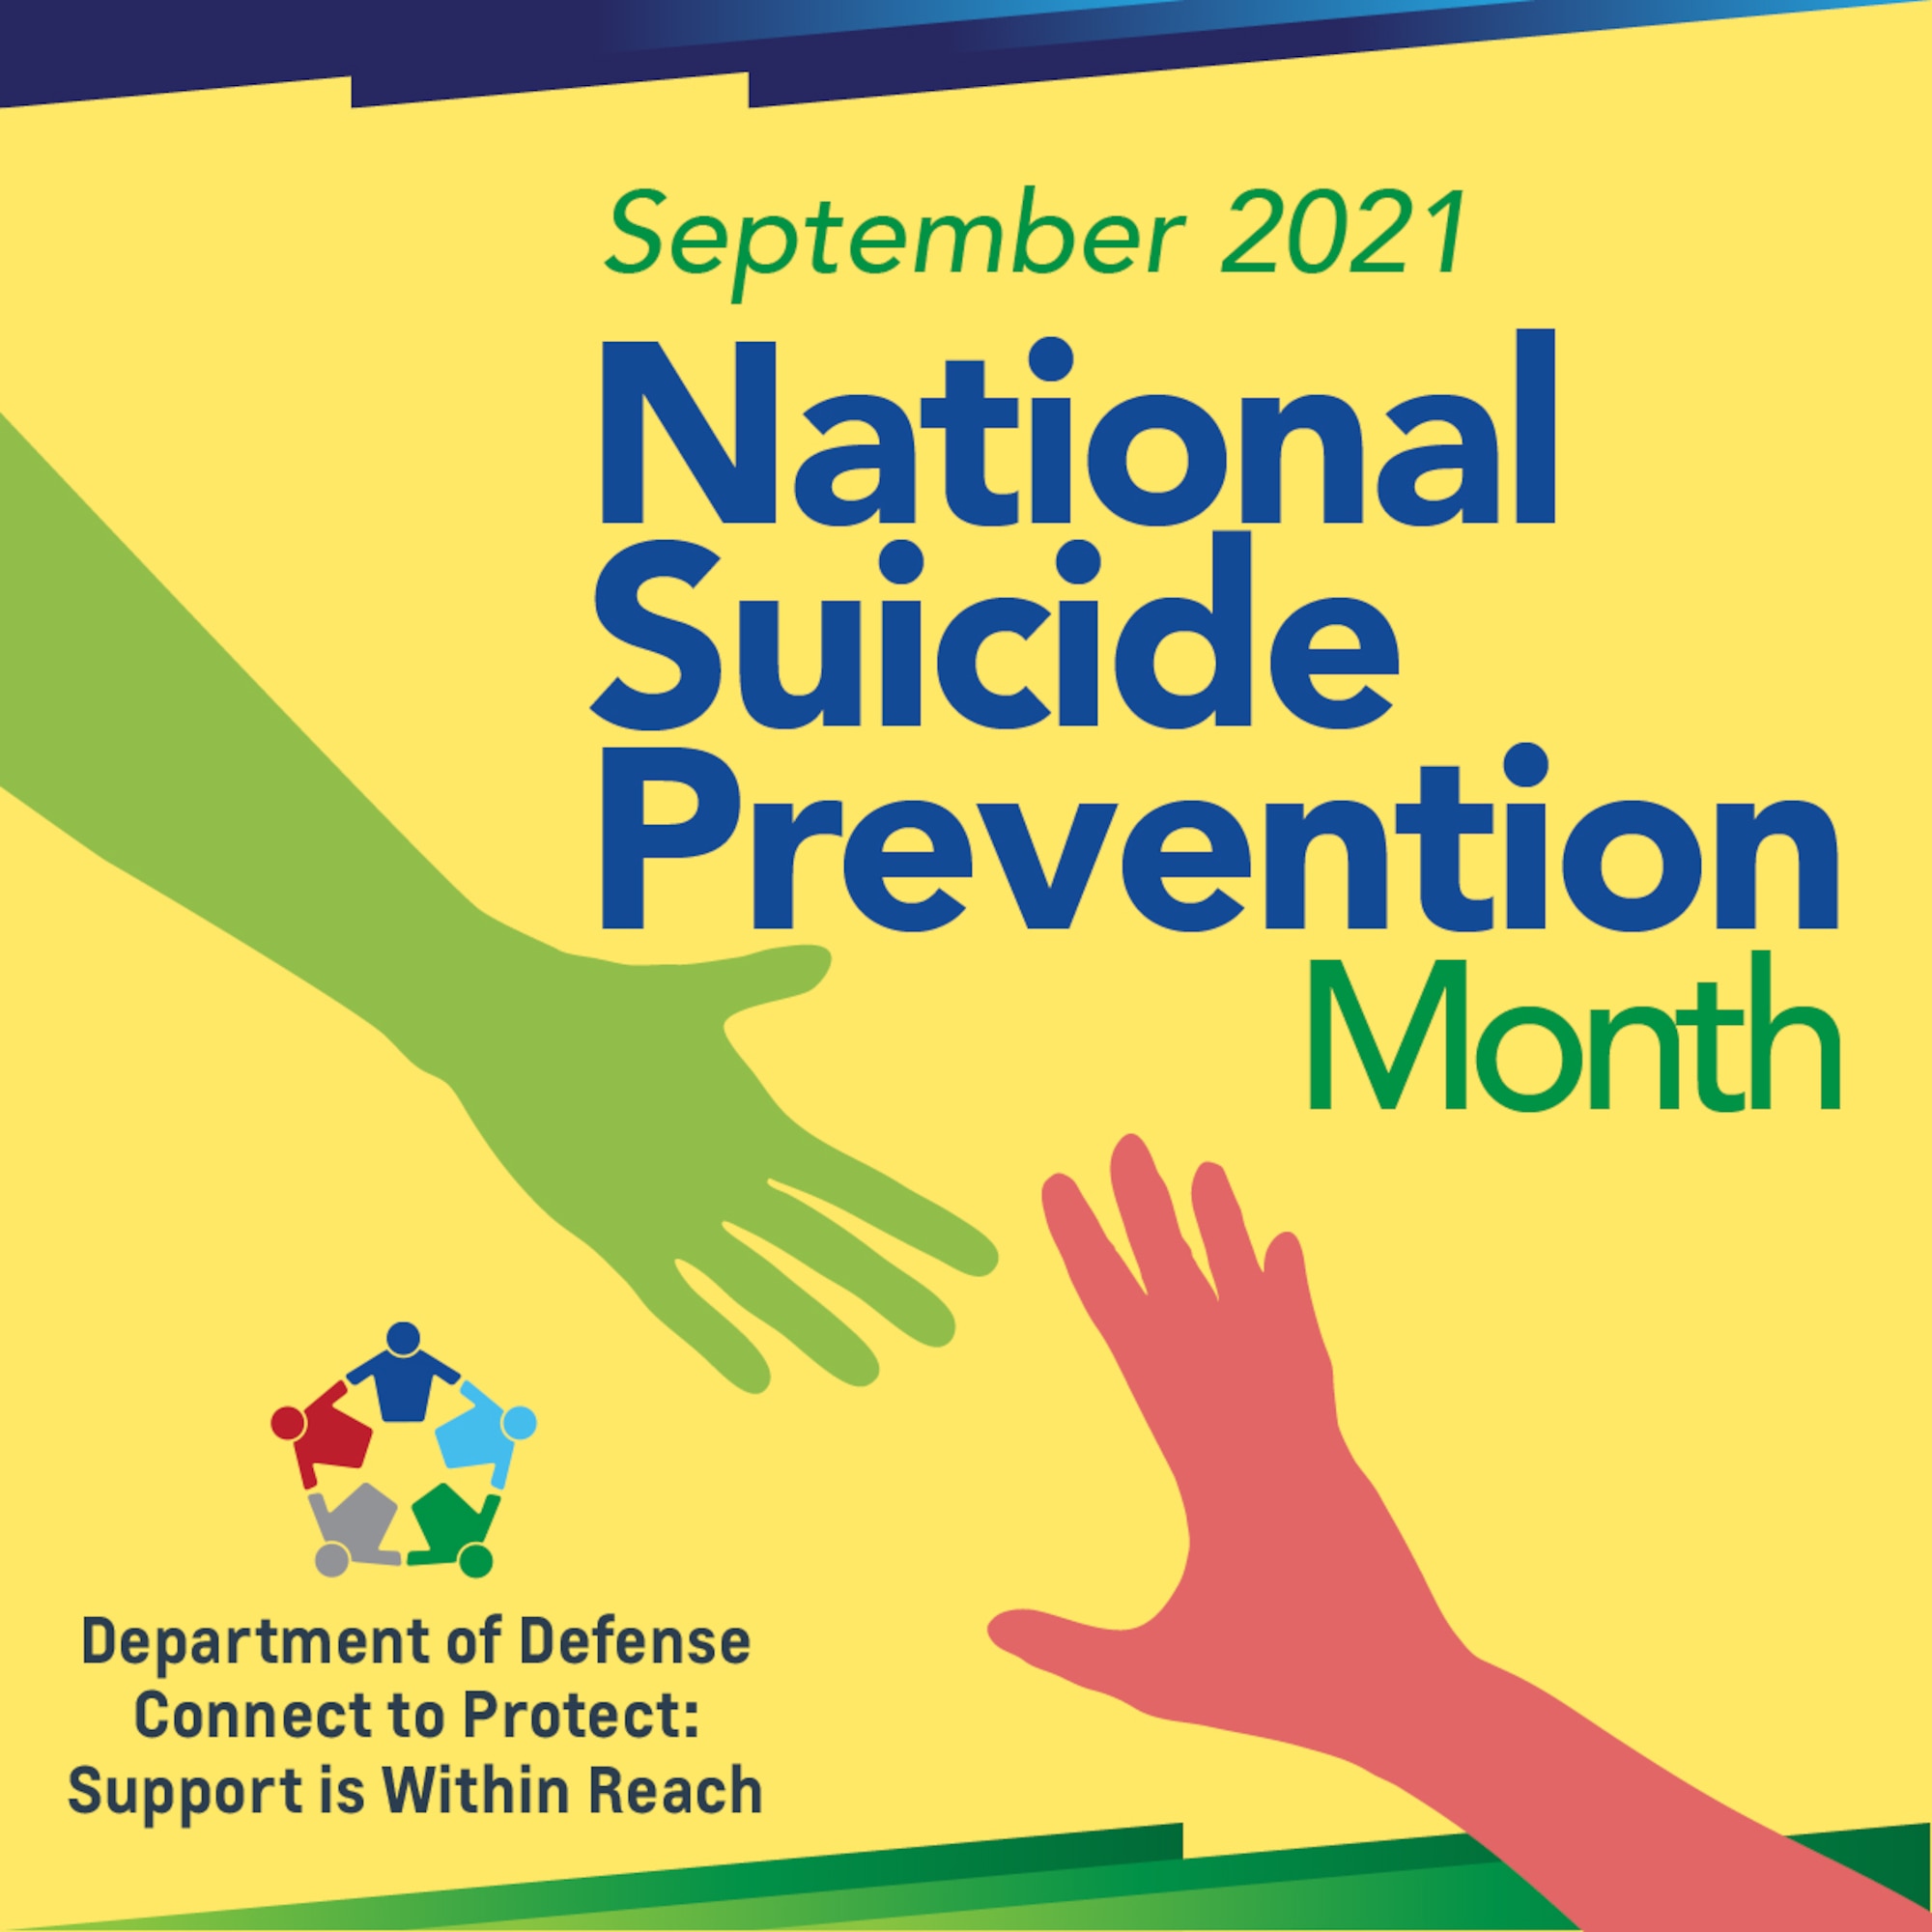 A graphic on National Suicide Prevention Month.